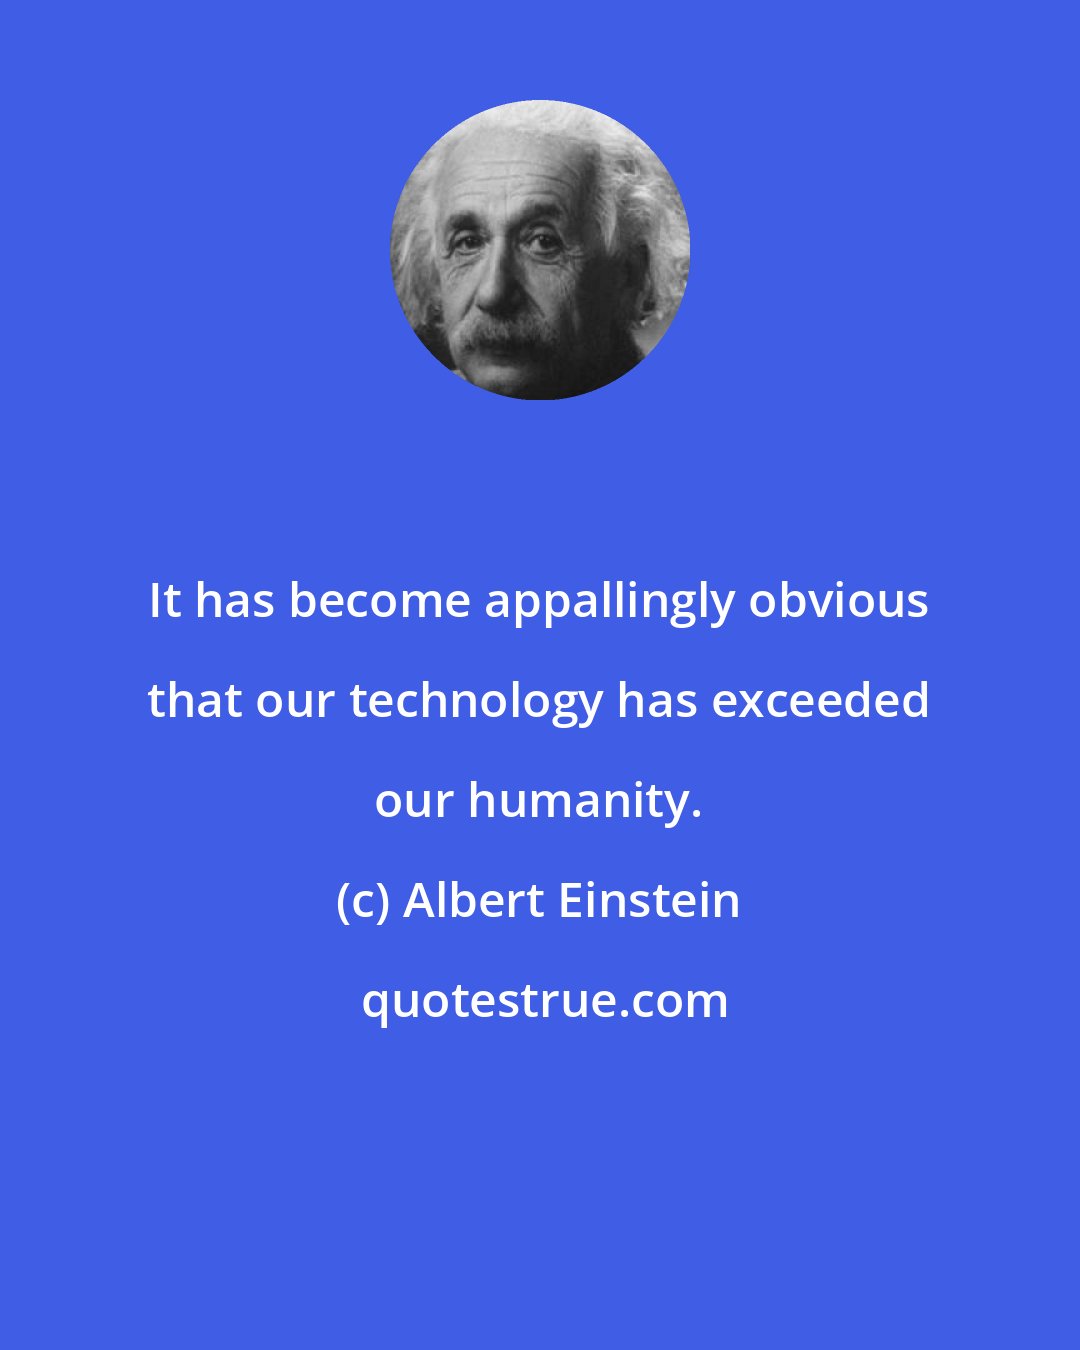 Albert Einstein: It has become appallingly obvious that our technology has exceeded our humanity.